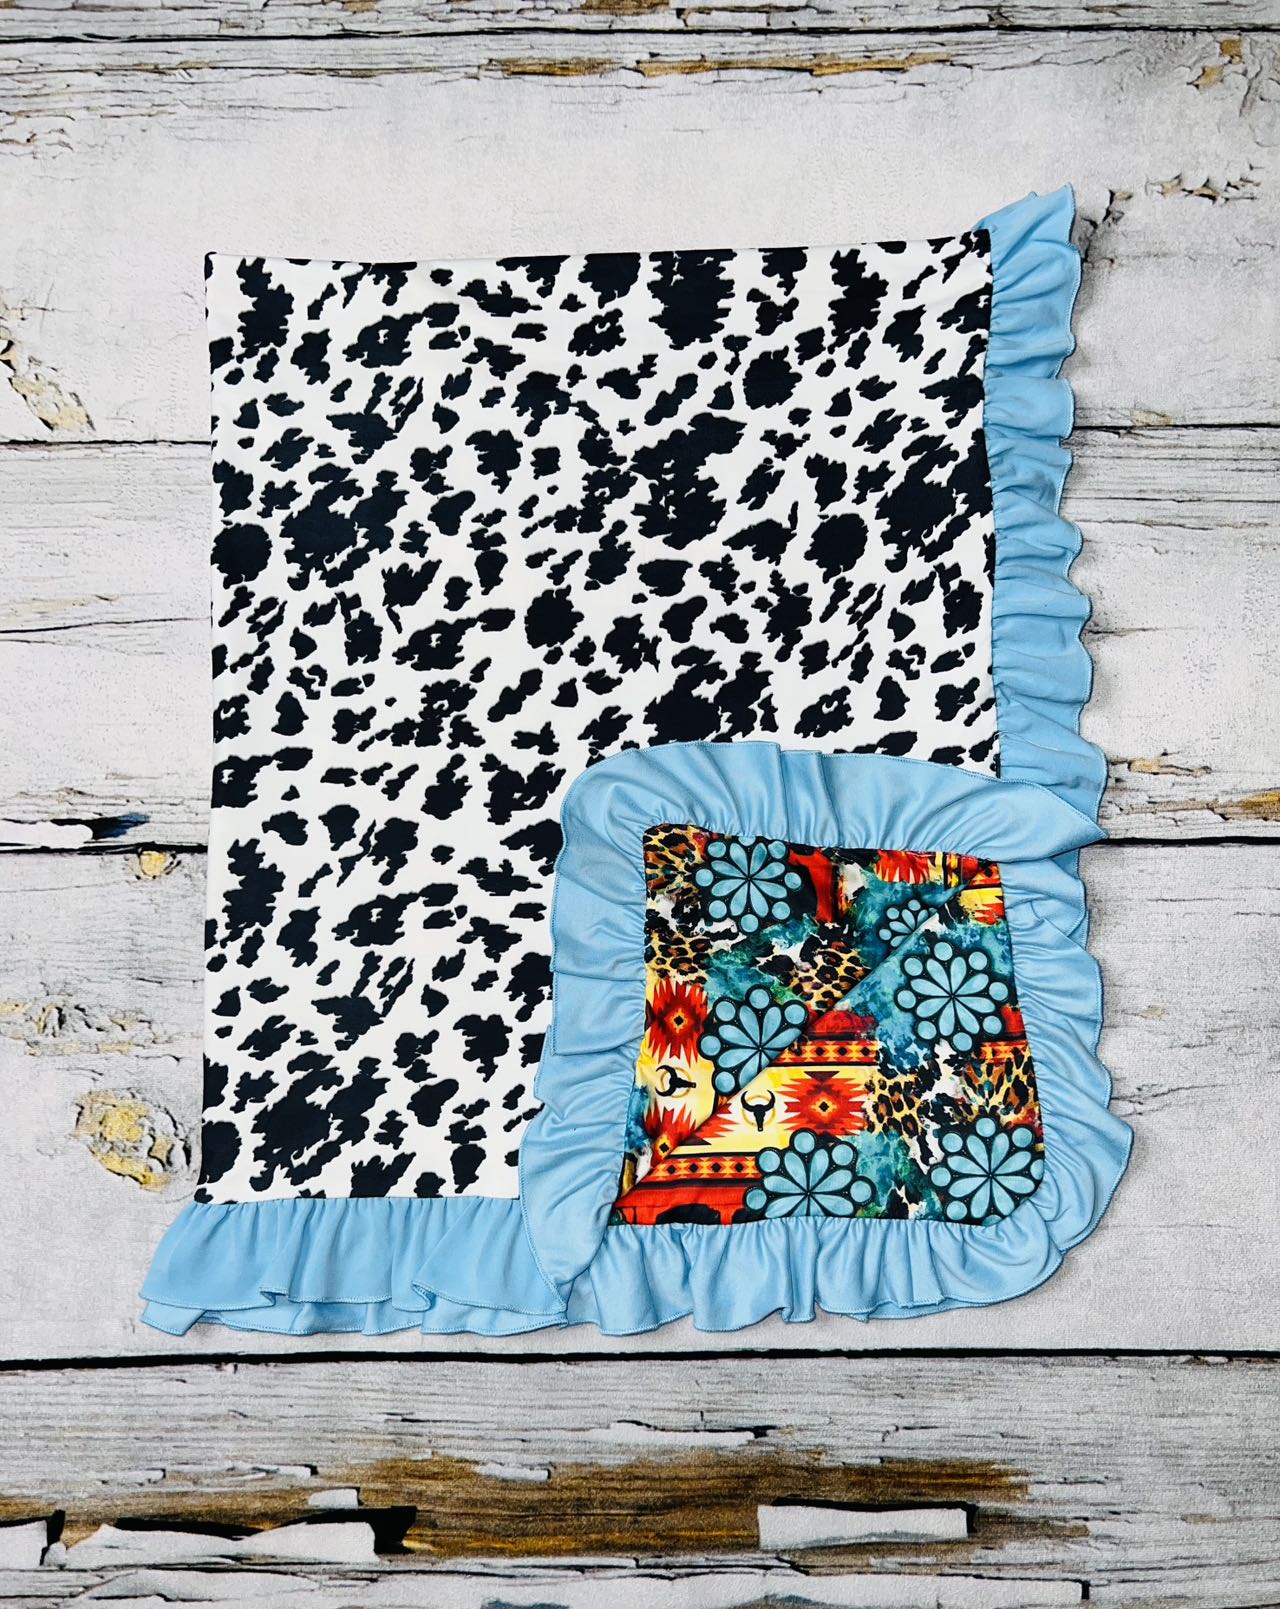 Buffalos & cow print reversible baby blanket w/turquoise ruffle DLH1212-7